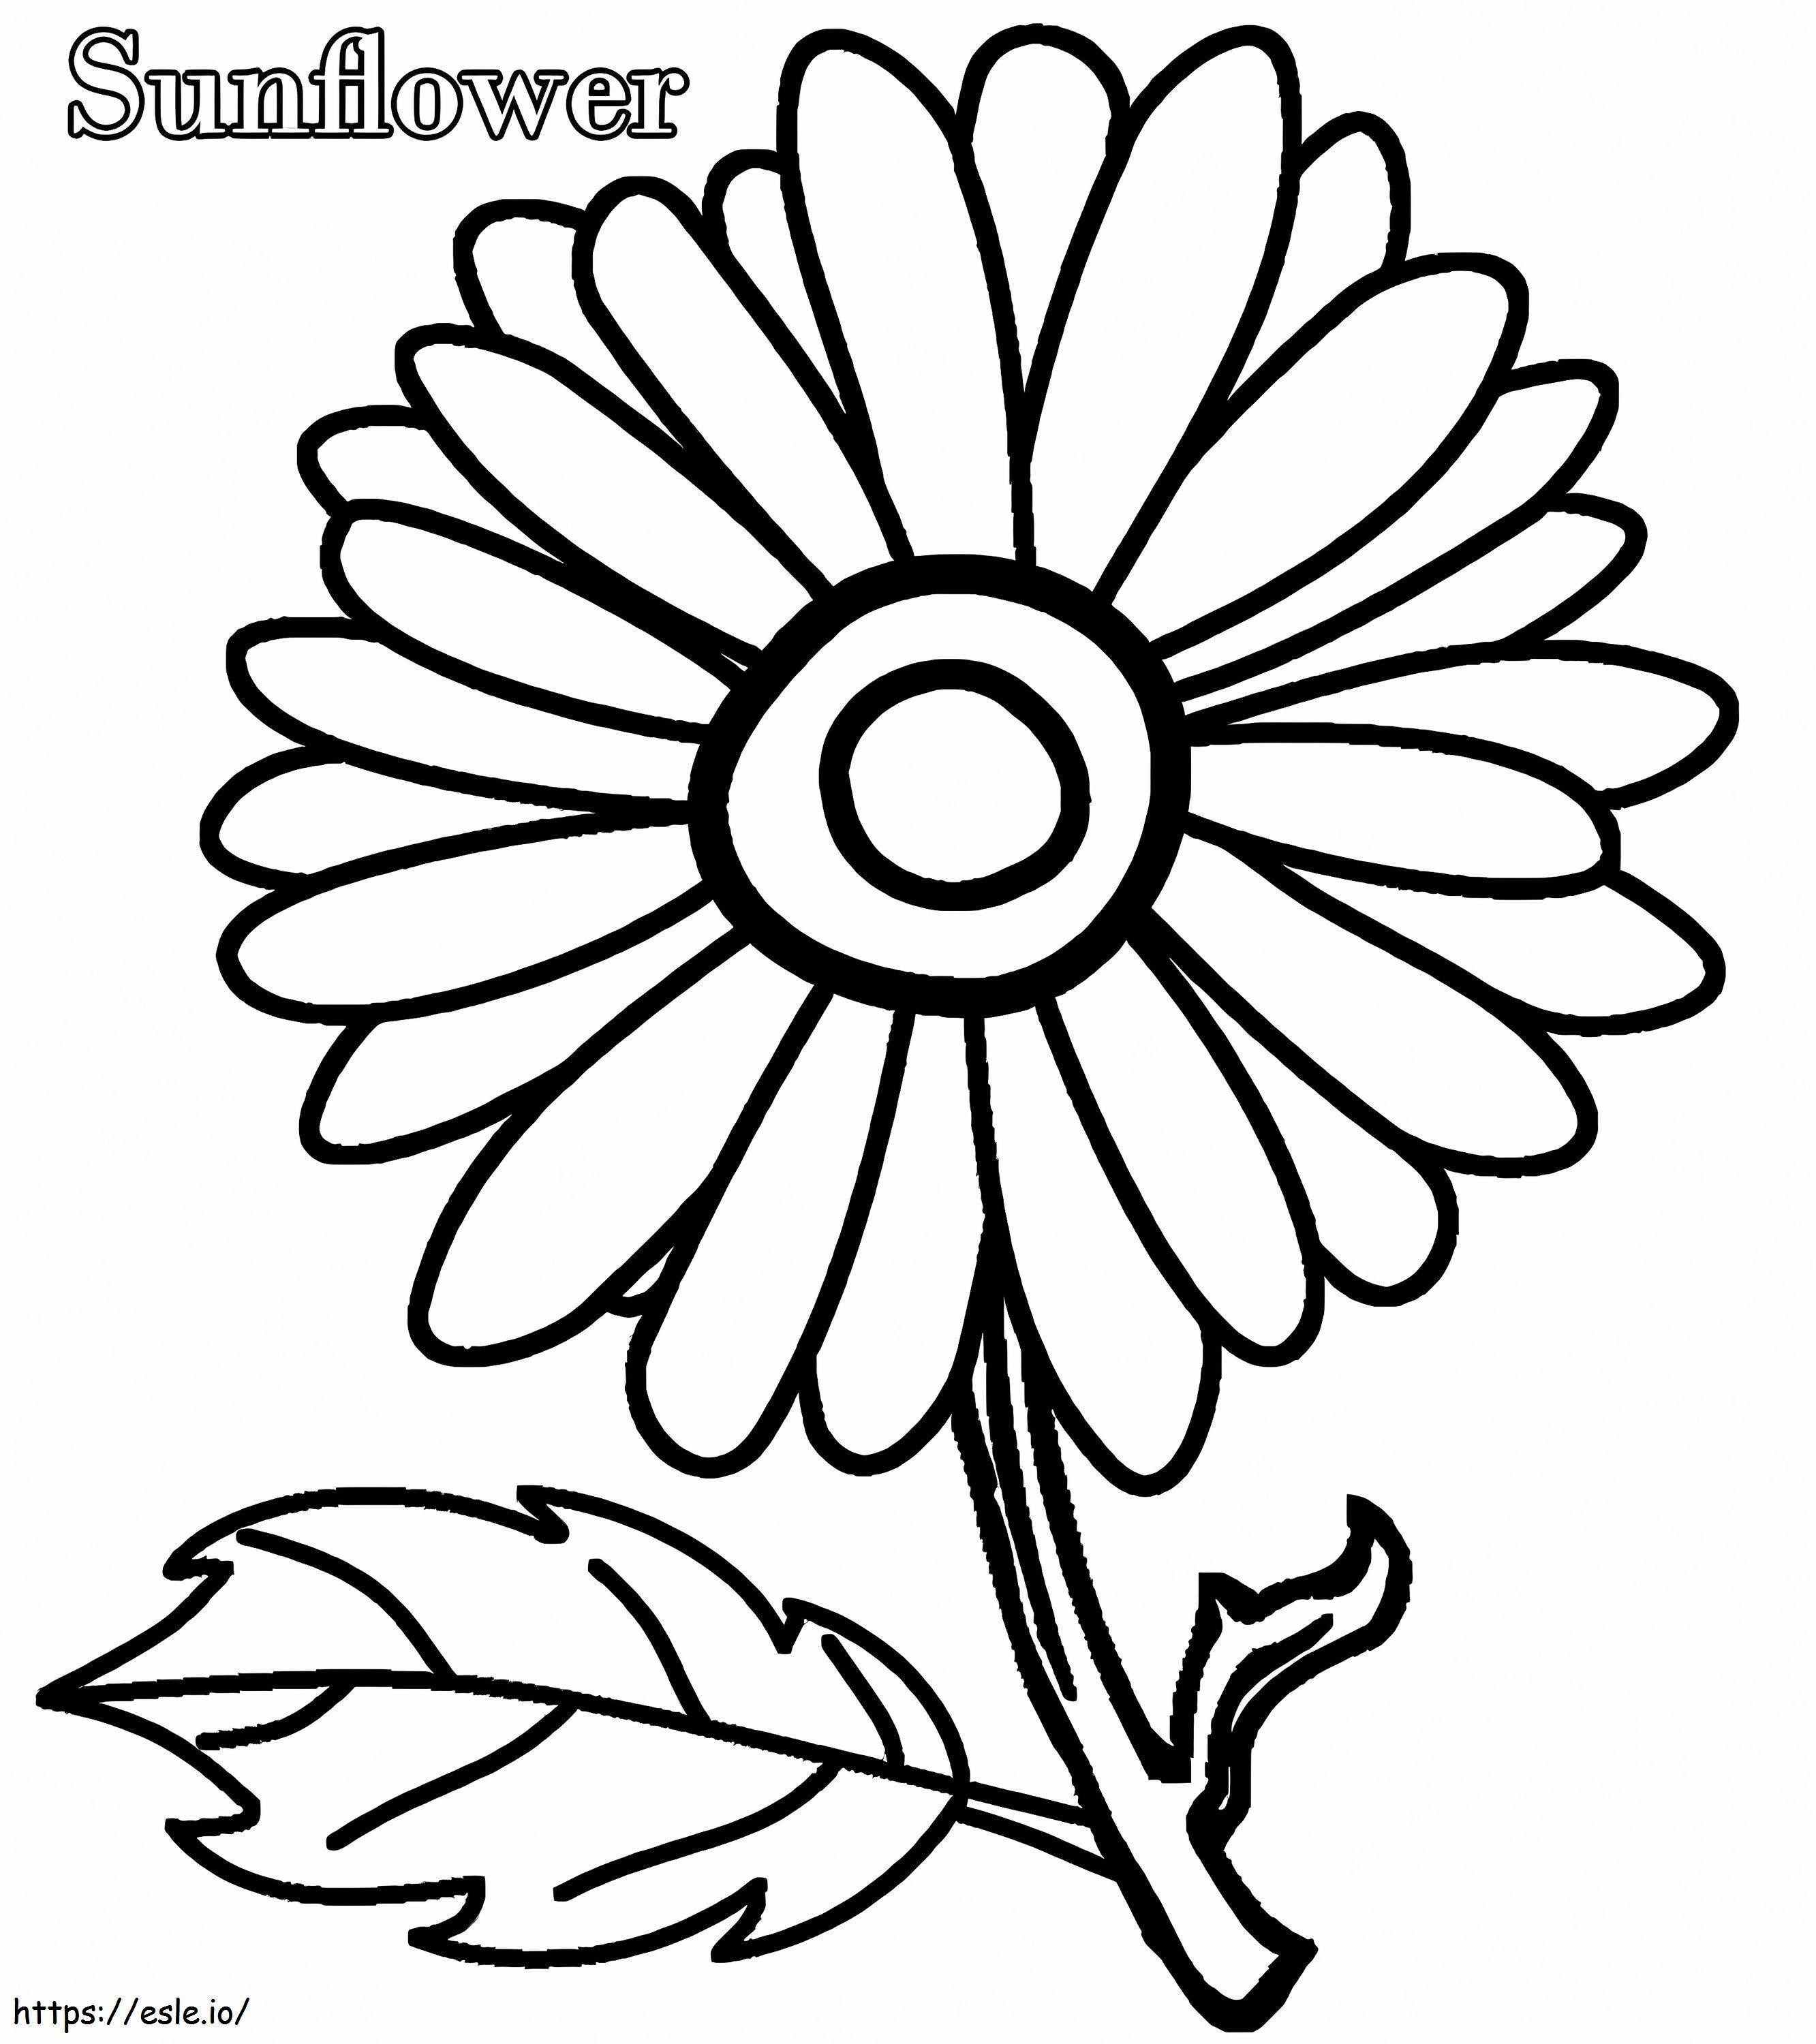 Simple Sunflower coloring page